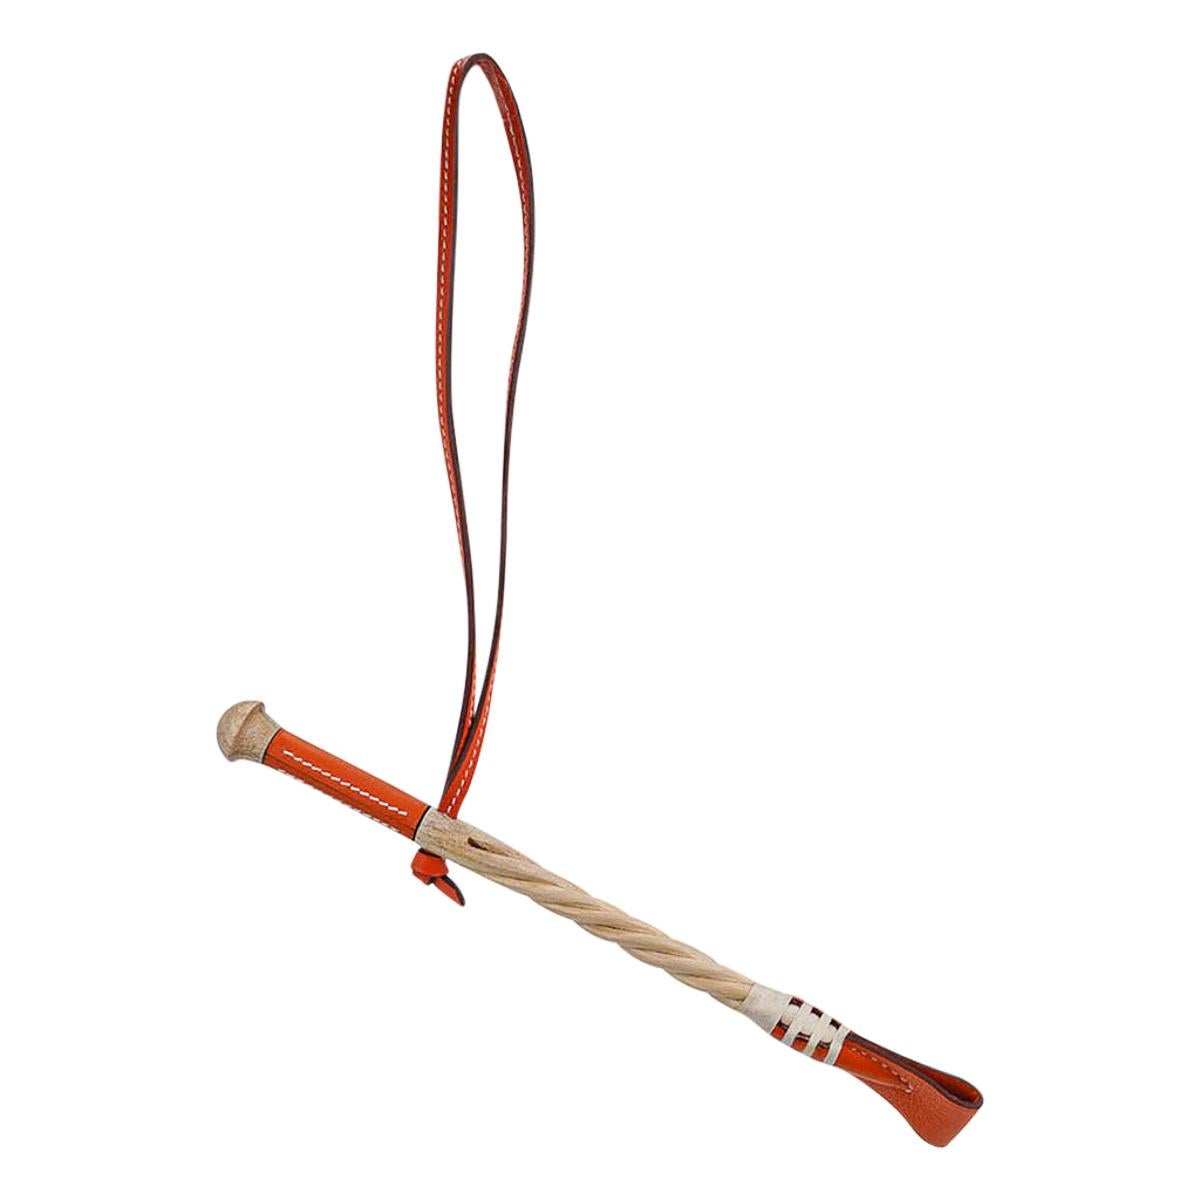 Mightychic offers a rare Hermes Paddock Cravache riding crop bag charm featured in Orange Vache Hunter leather.
Beautifully detailed hackberry wood.
Stamped Hermes Paris Made in France on the leather.
Charming and playful she easily adorns a myriad